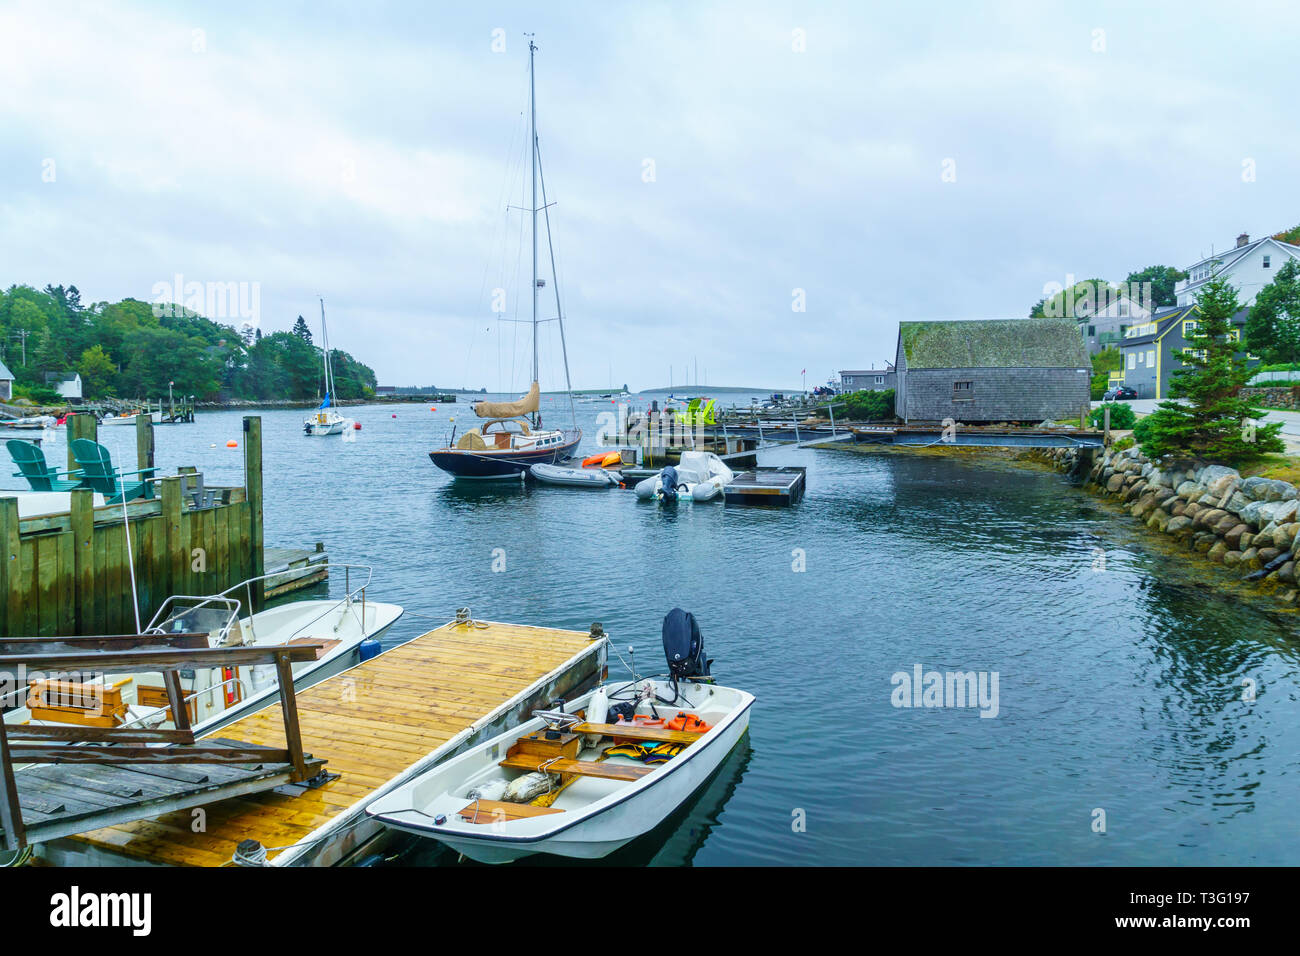 View of bay, boats and houses in Chester, Nova Scotia, Canada Stock Photo